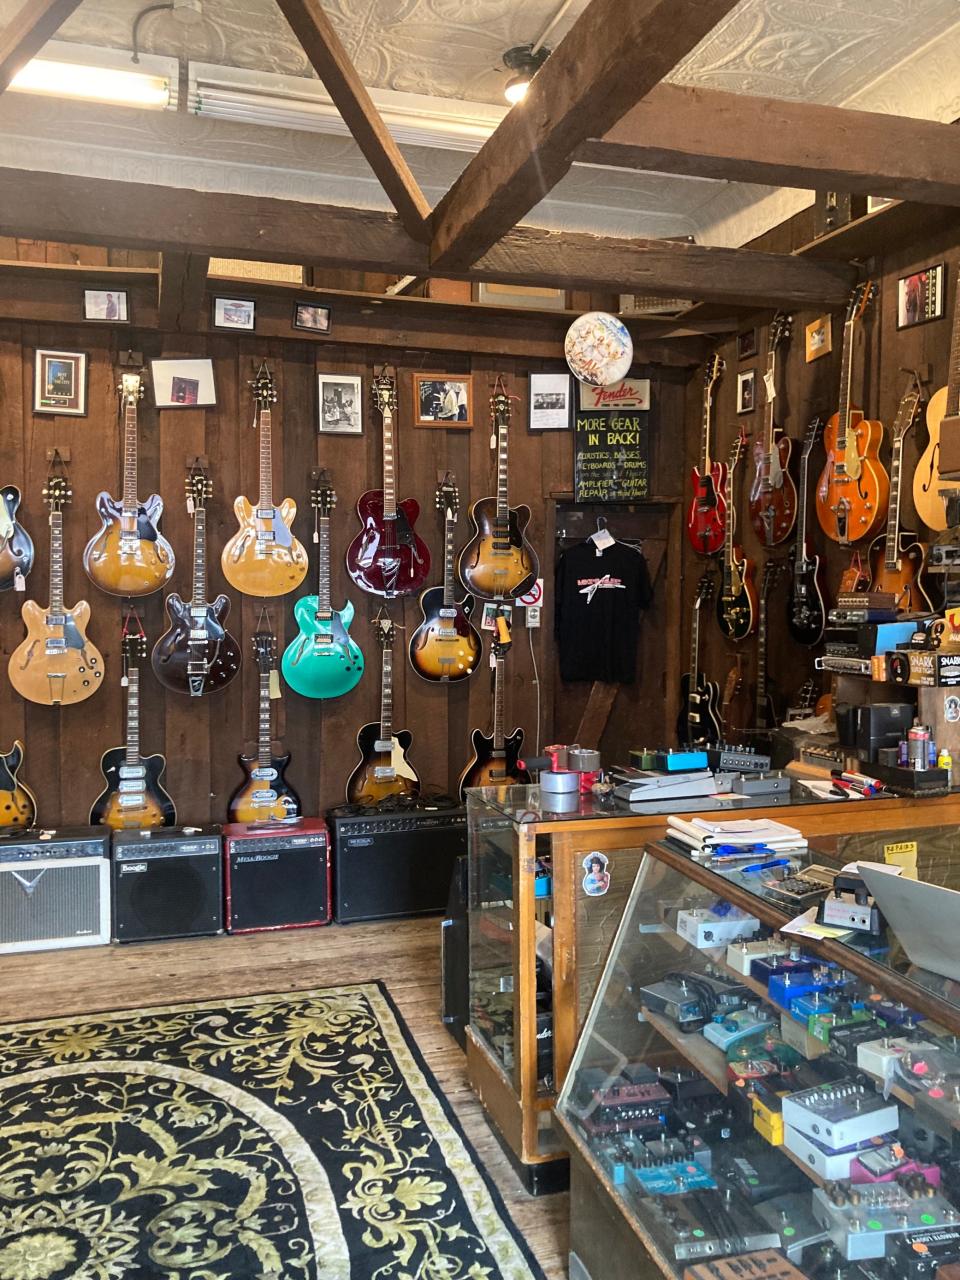 Vintage electric guitars, amps and musical gadgets on display in the front room of Mike's Music on Short Vine.